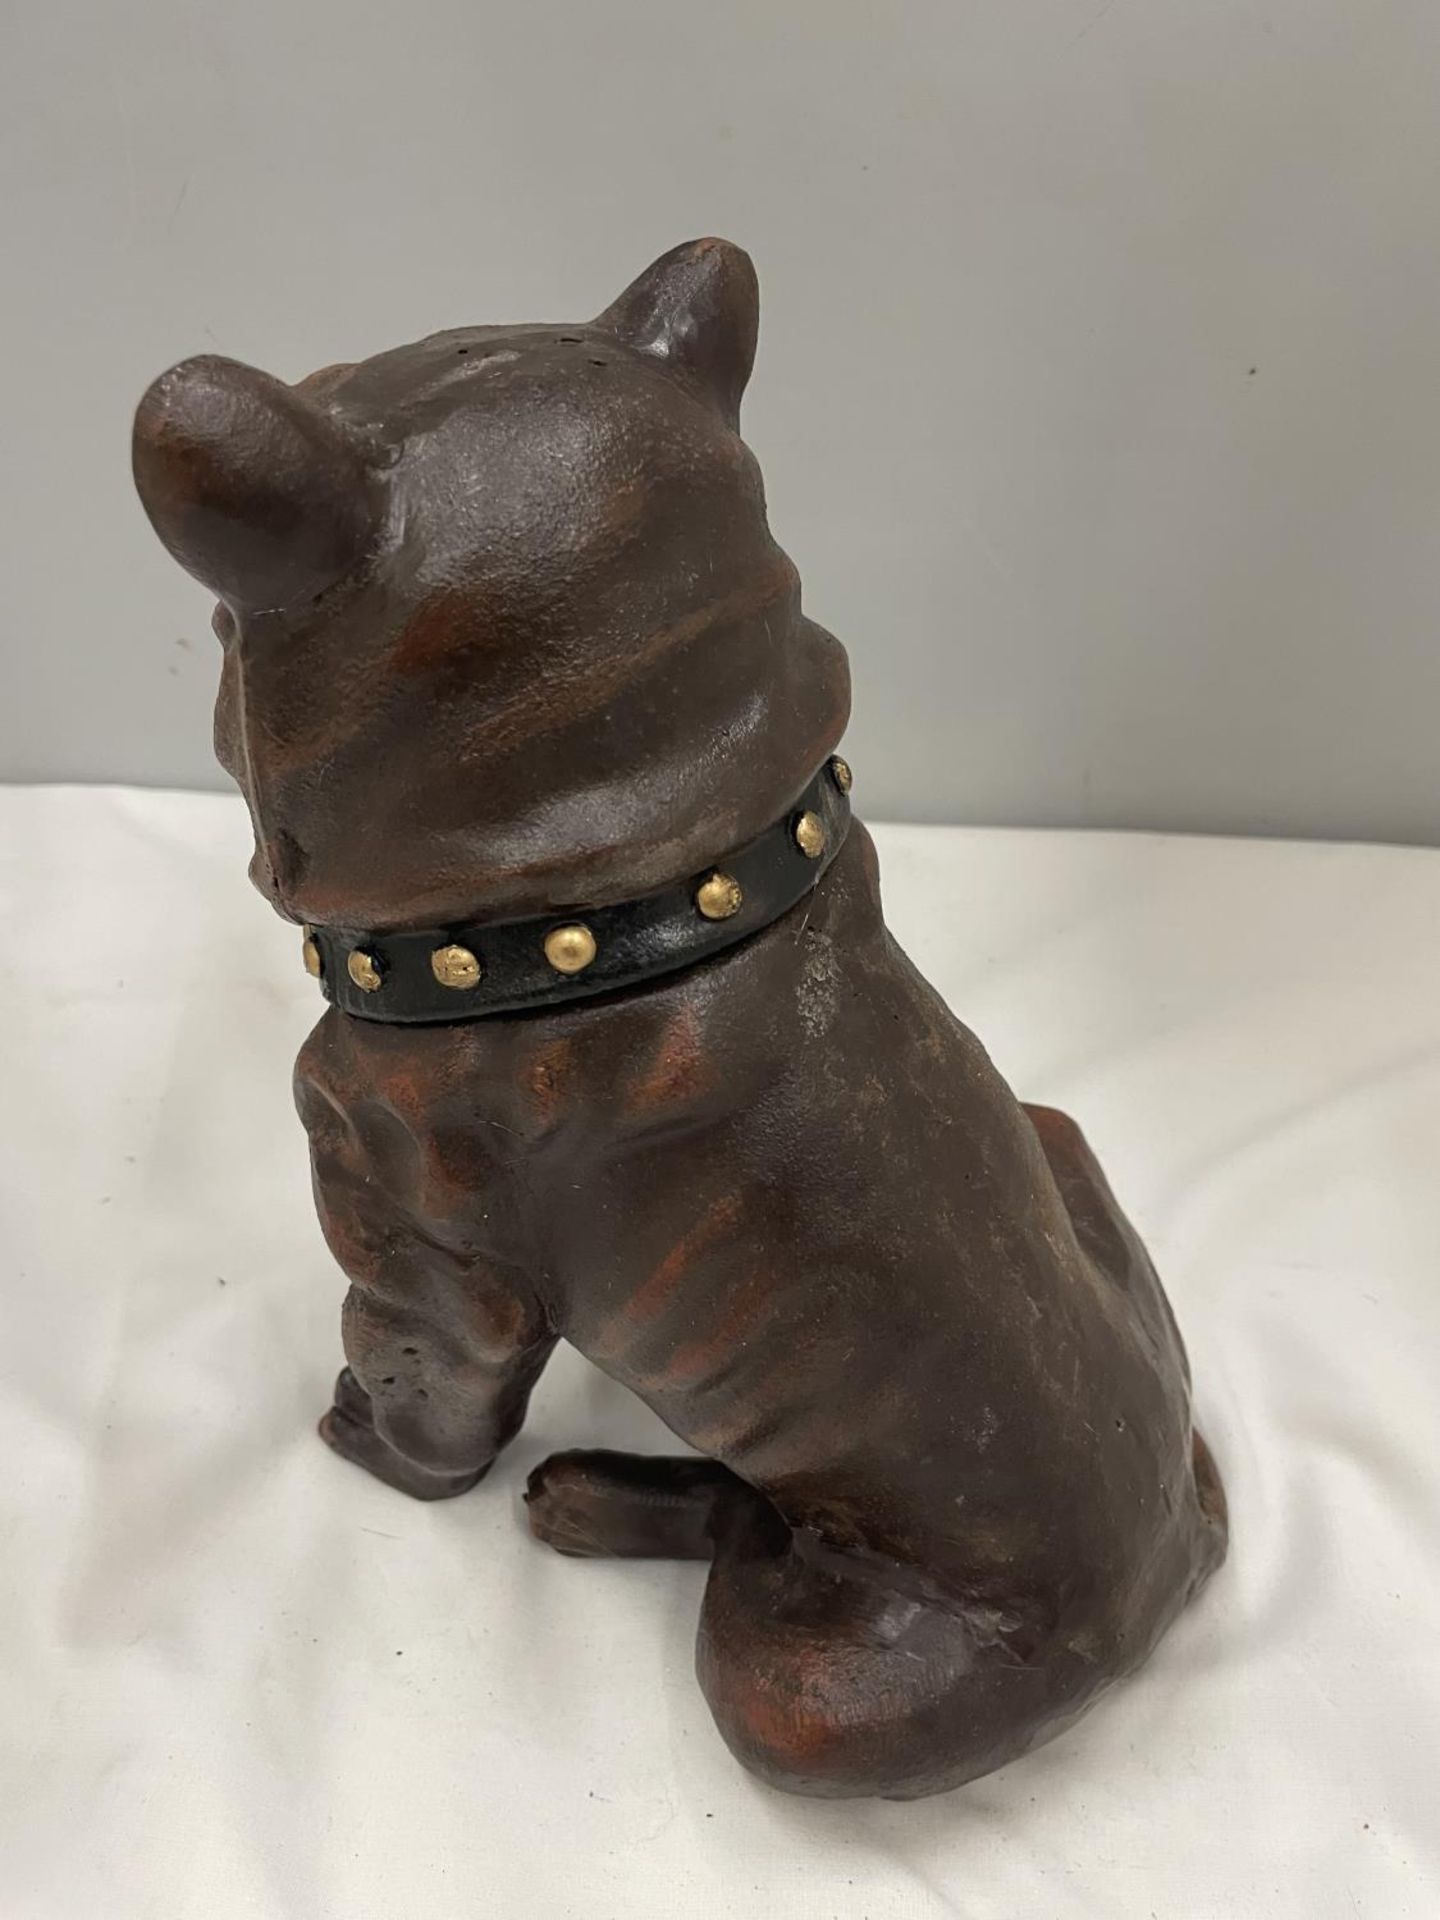 A CAST FIGURE OF A BULLDOG WITH GLASS EYES - Image 3 of 5